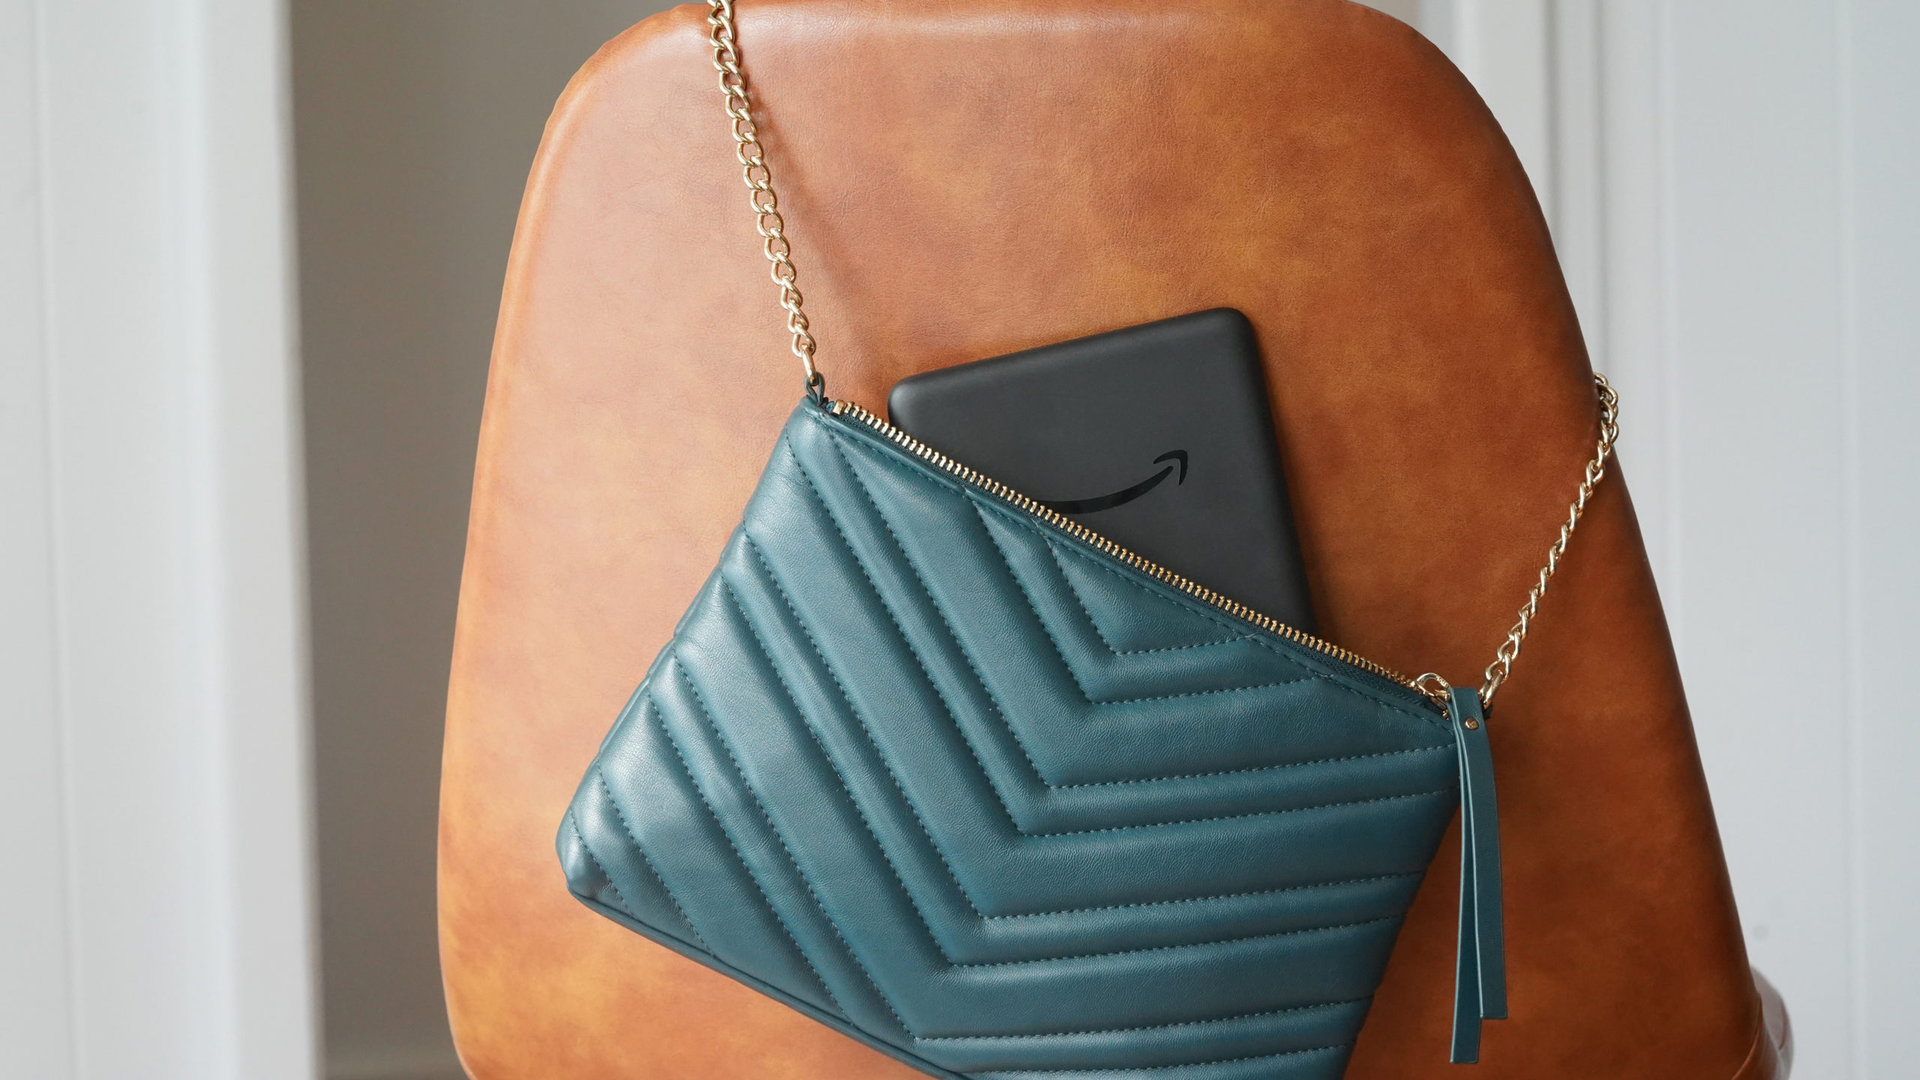 An Amazon Kindle pokes out of a woman's purse.